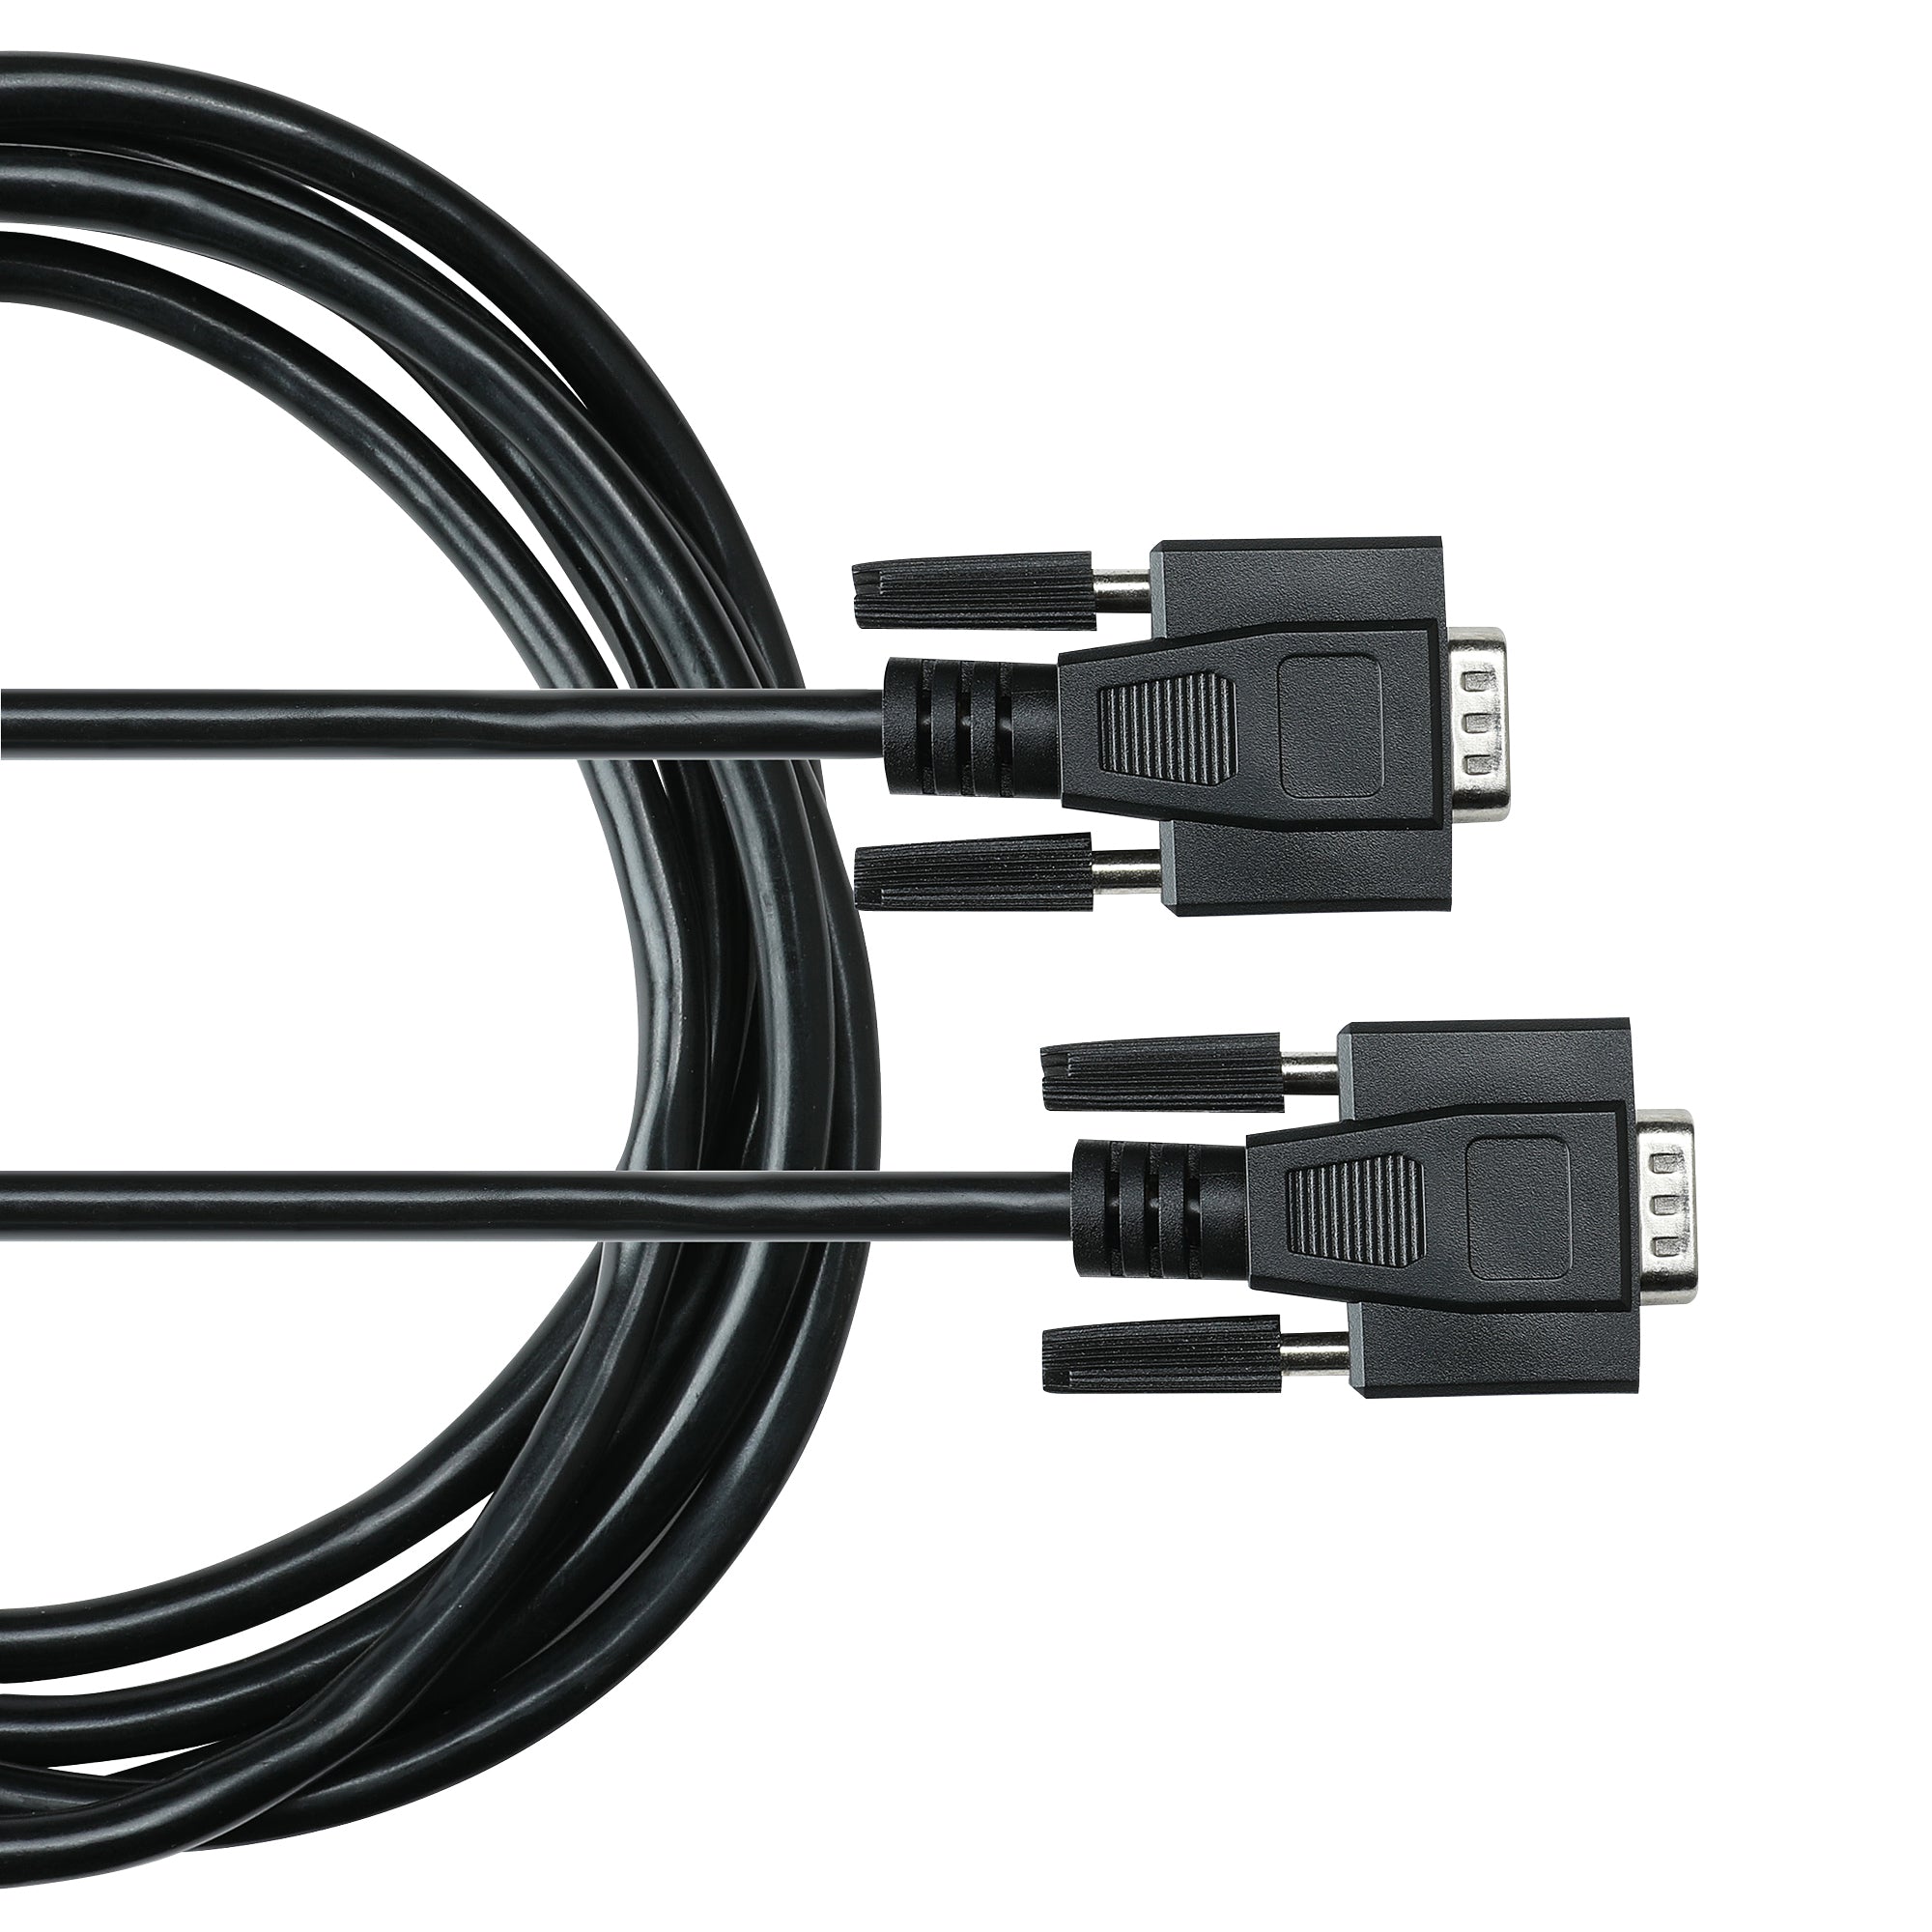 VGA Cable Plus Adaptor For Extension